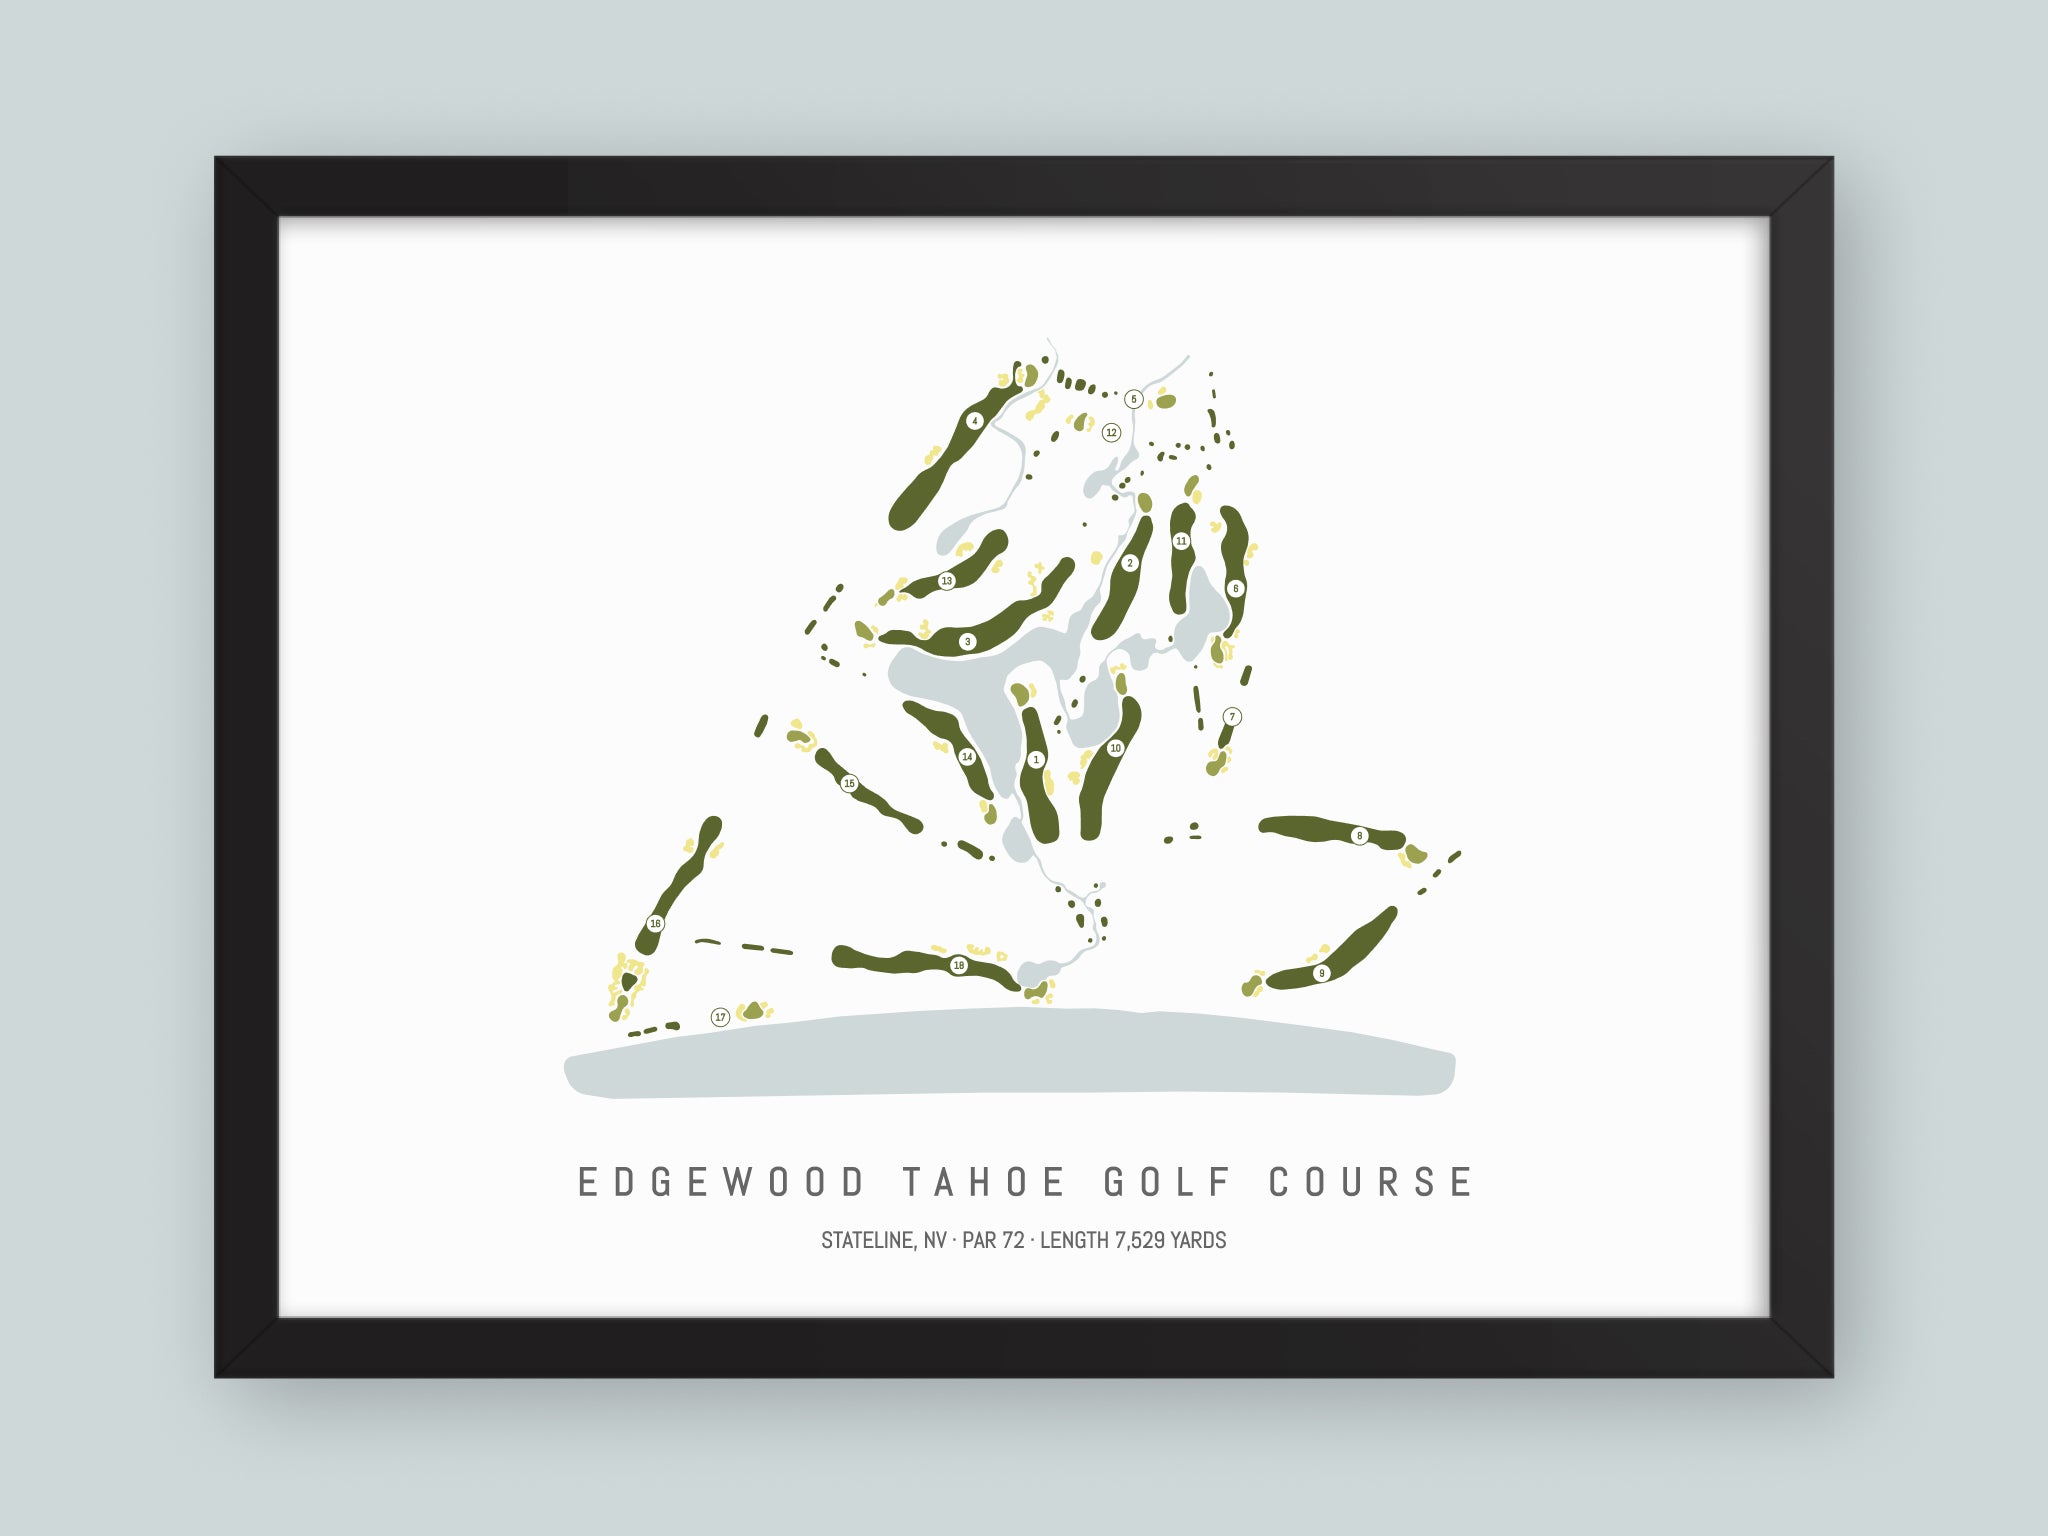 Edgewood-Tahoe-Golf-Course-NV--Black-Frame-24x18-With-Hole-Numbers